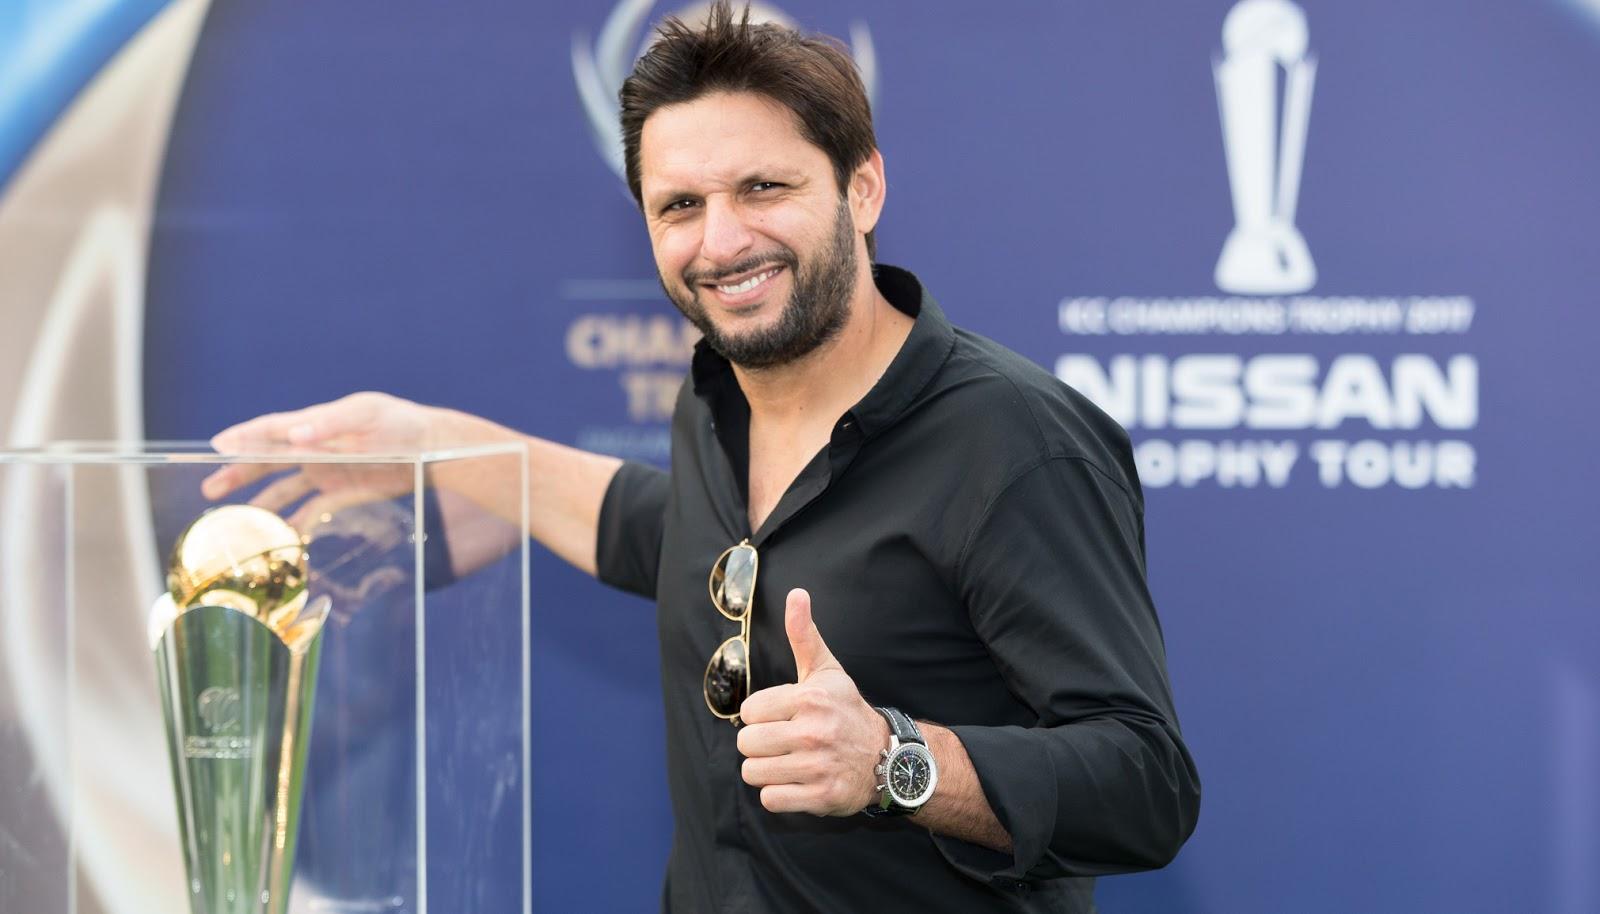 Shahid Afridi Wallpaper, Image, Photos, Picture Download